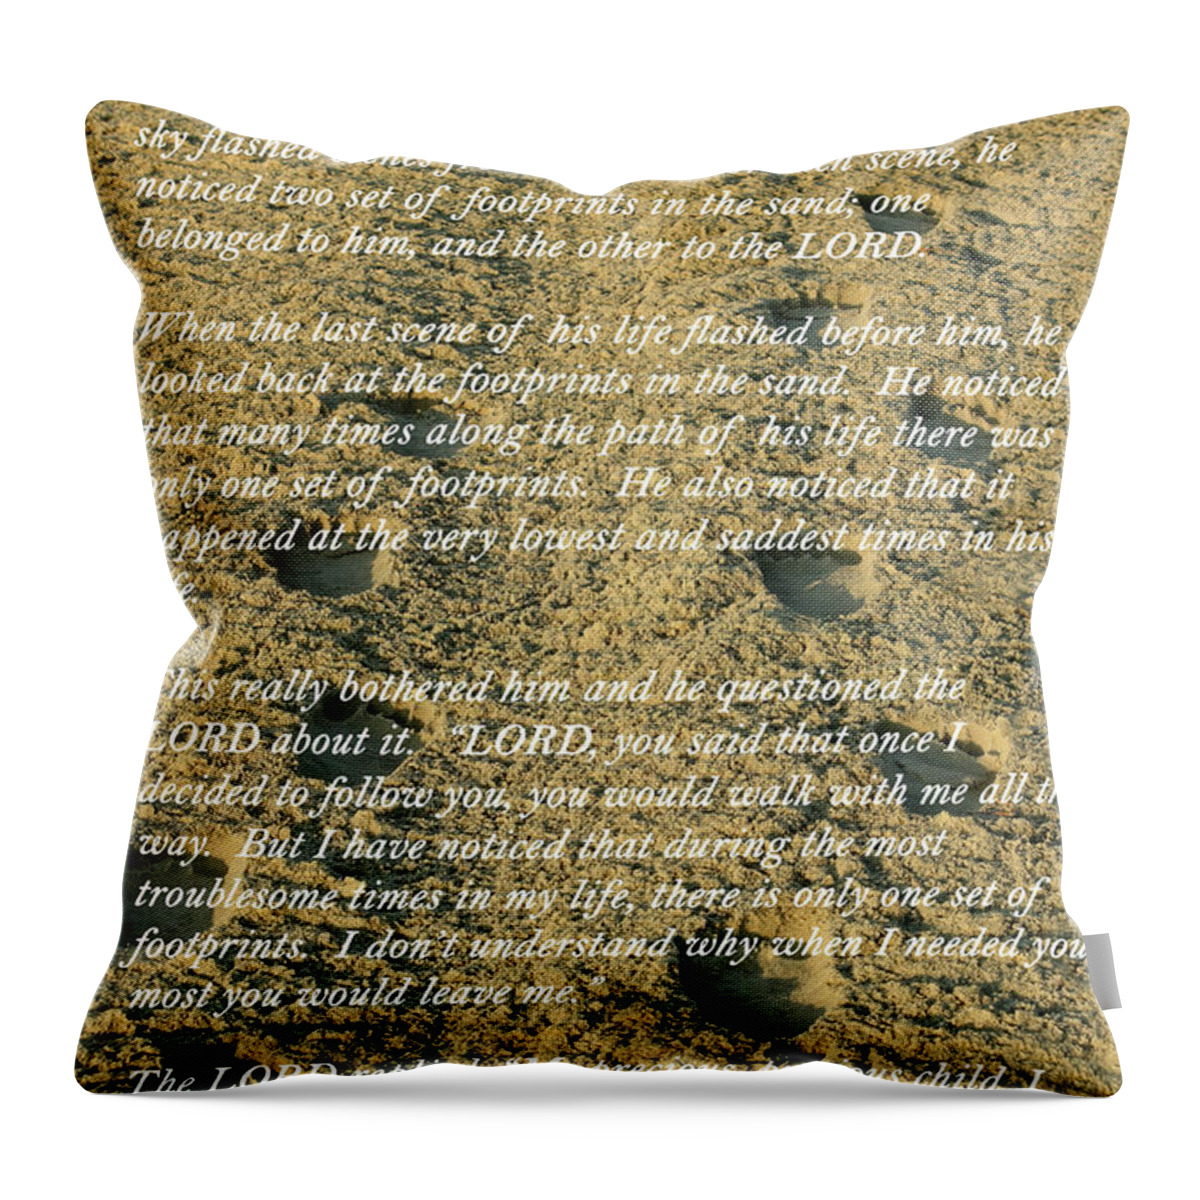 Footprints In The Sand Throw Pillow featuring the photograph Footprints In The Sand by Lens Art Photography By Larry Trager